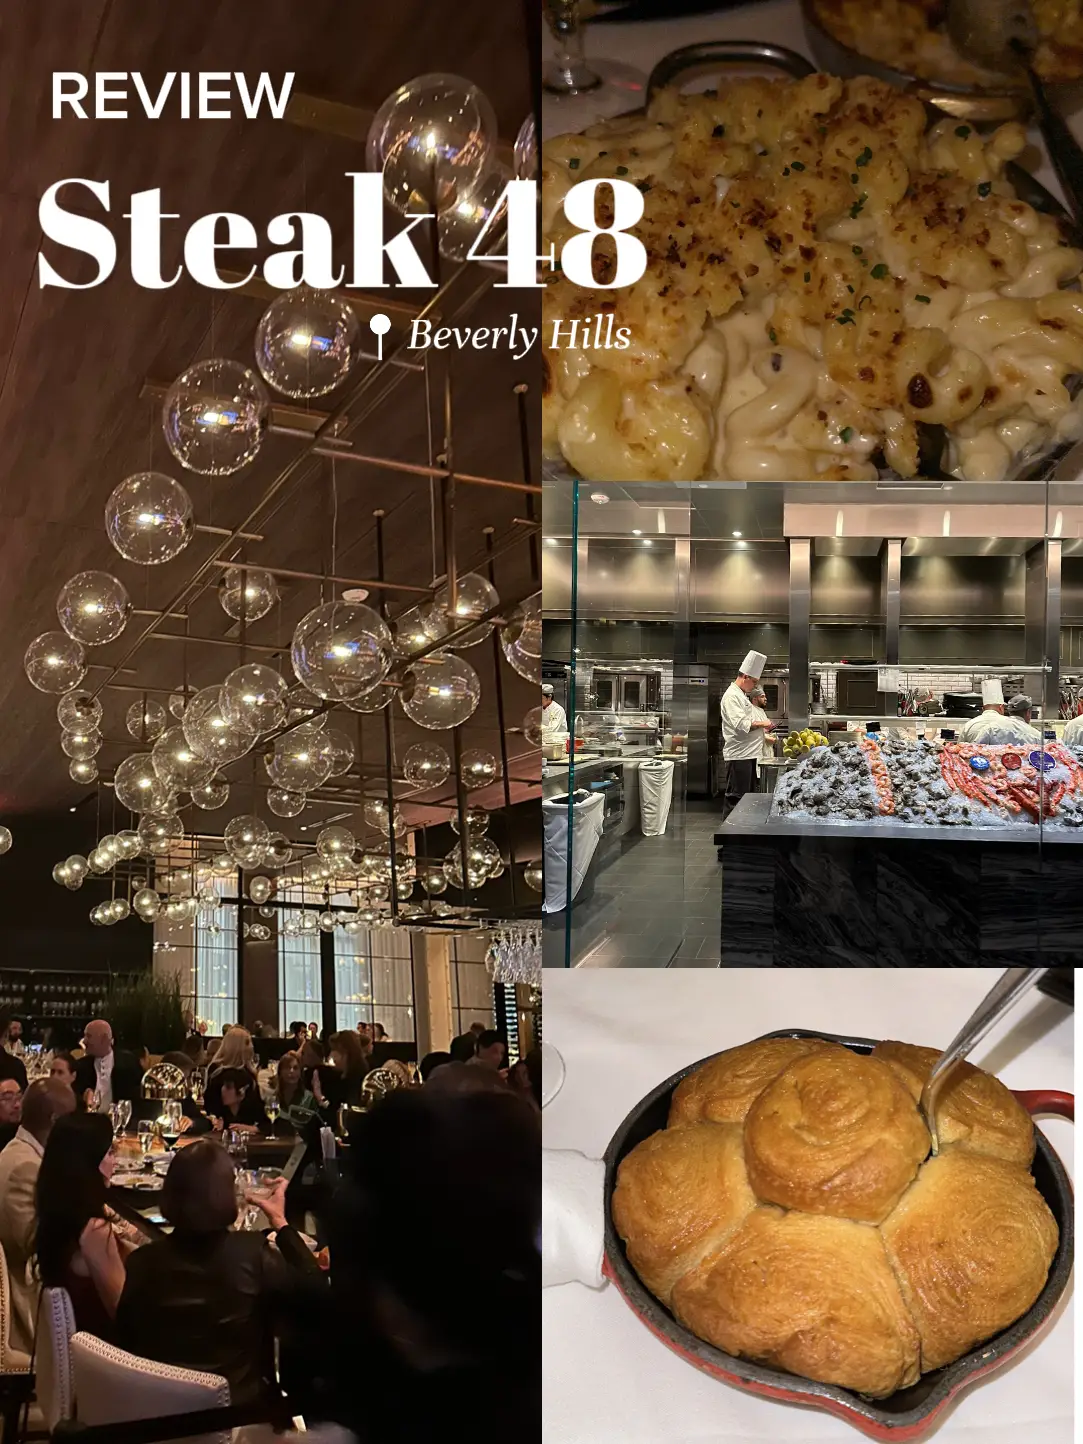 Steak 48 Beverly Hills Review's images